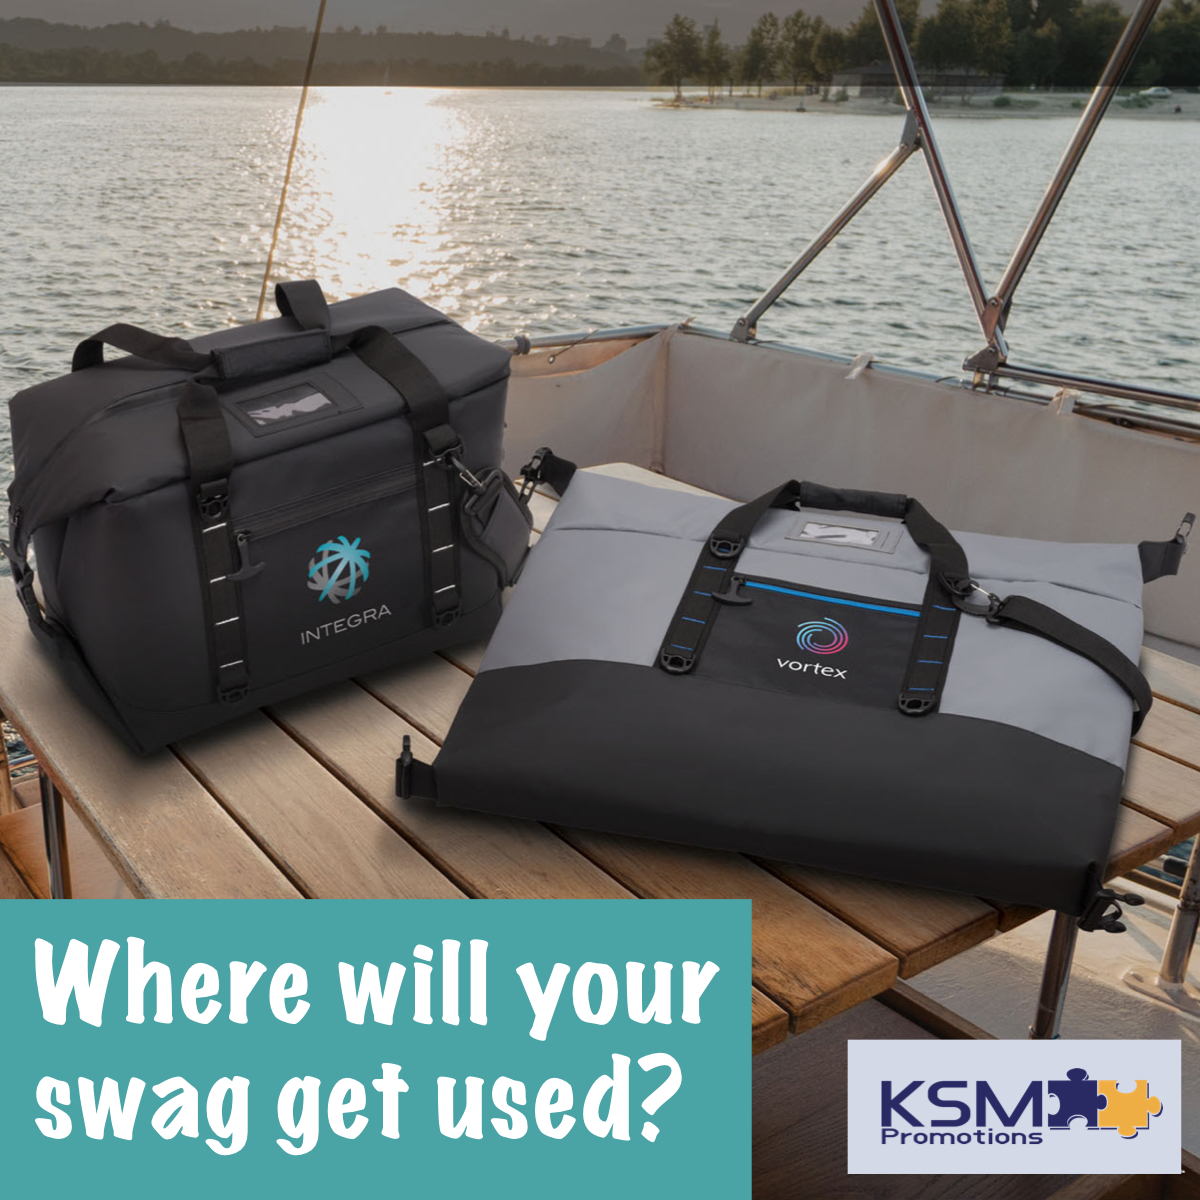 Where will your brand travel to?
Quality coolers and travel bags will be going to lots of places... 
They are perfect appreciation gifts!
Contact us for a quote.

#ksmpromotions #customcoolers